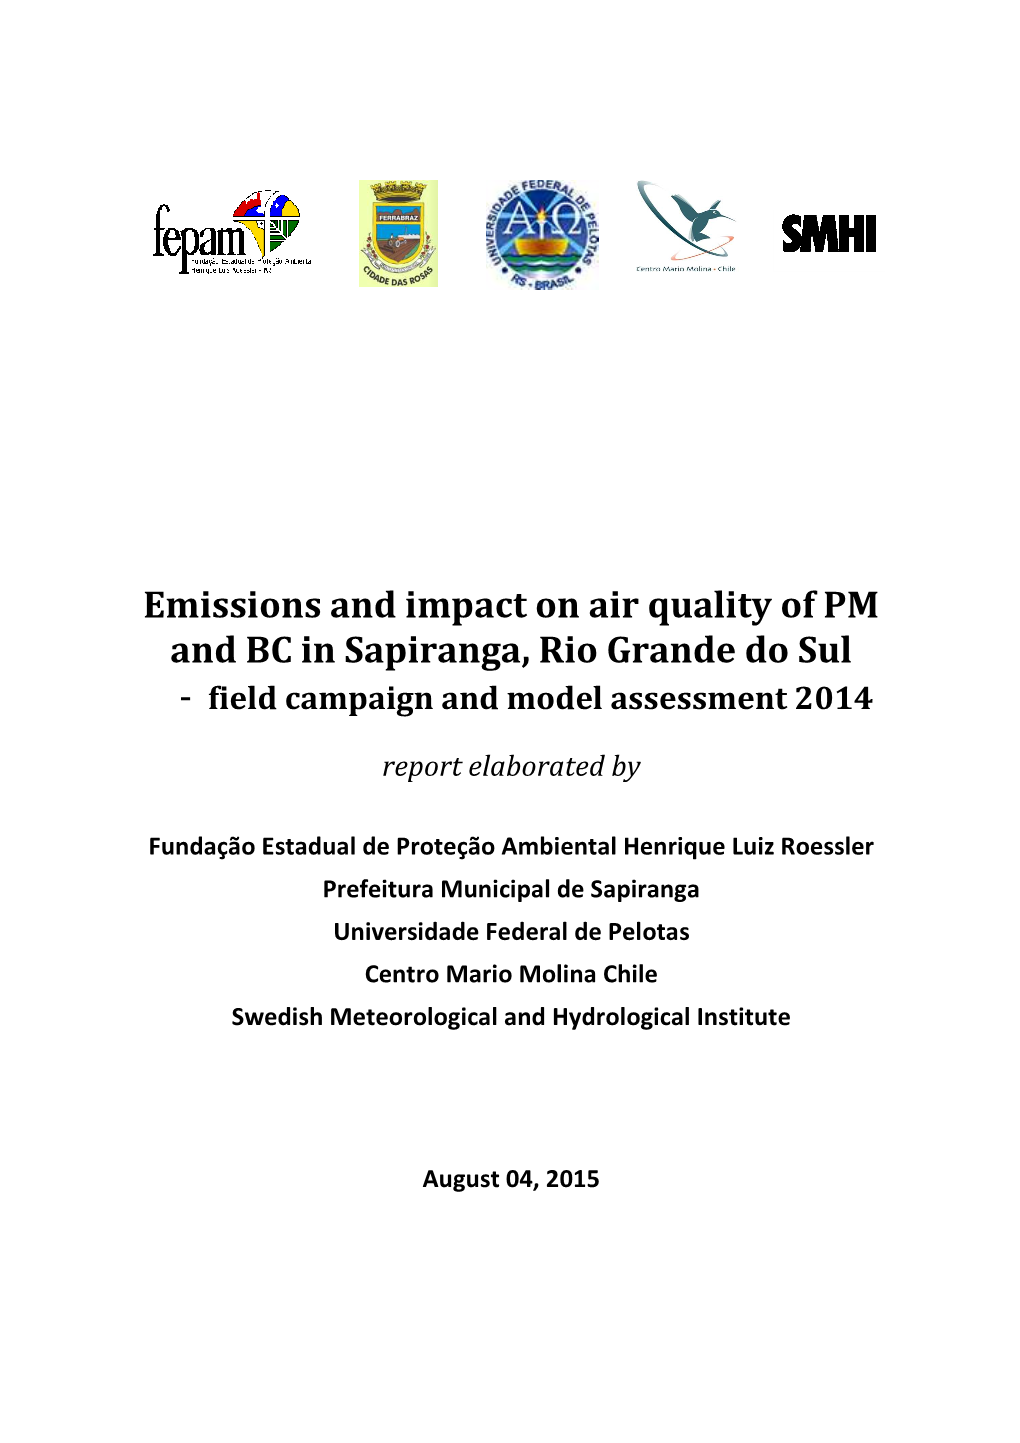 Emissions and Impact on Air Quality of PM and BC in Sapiranga, Rio Grande Do Sul - Field Campaign and Model Assessment 2014